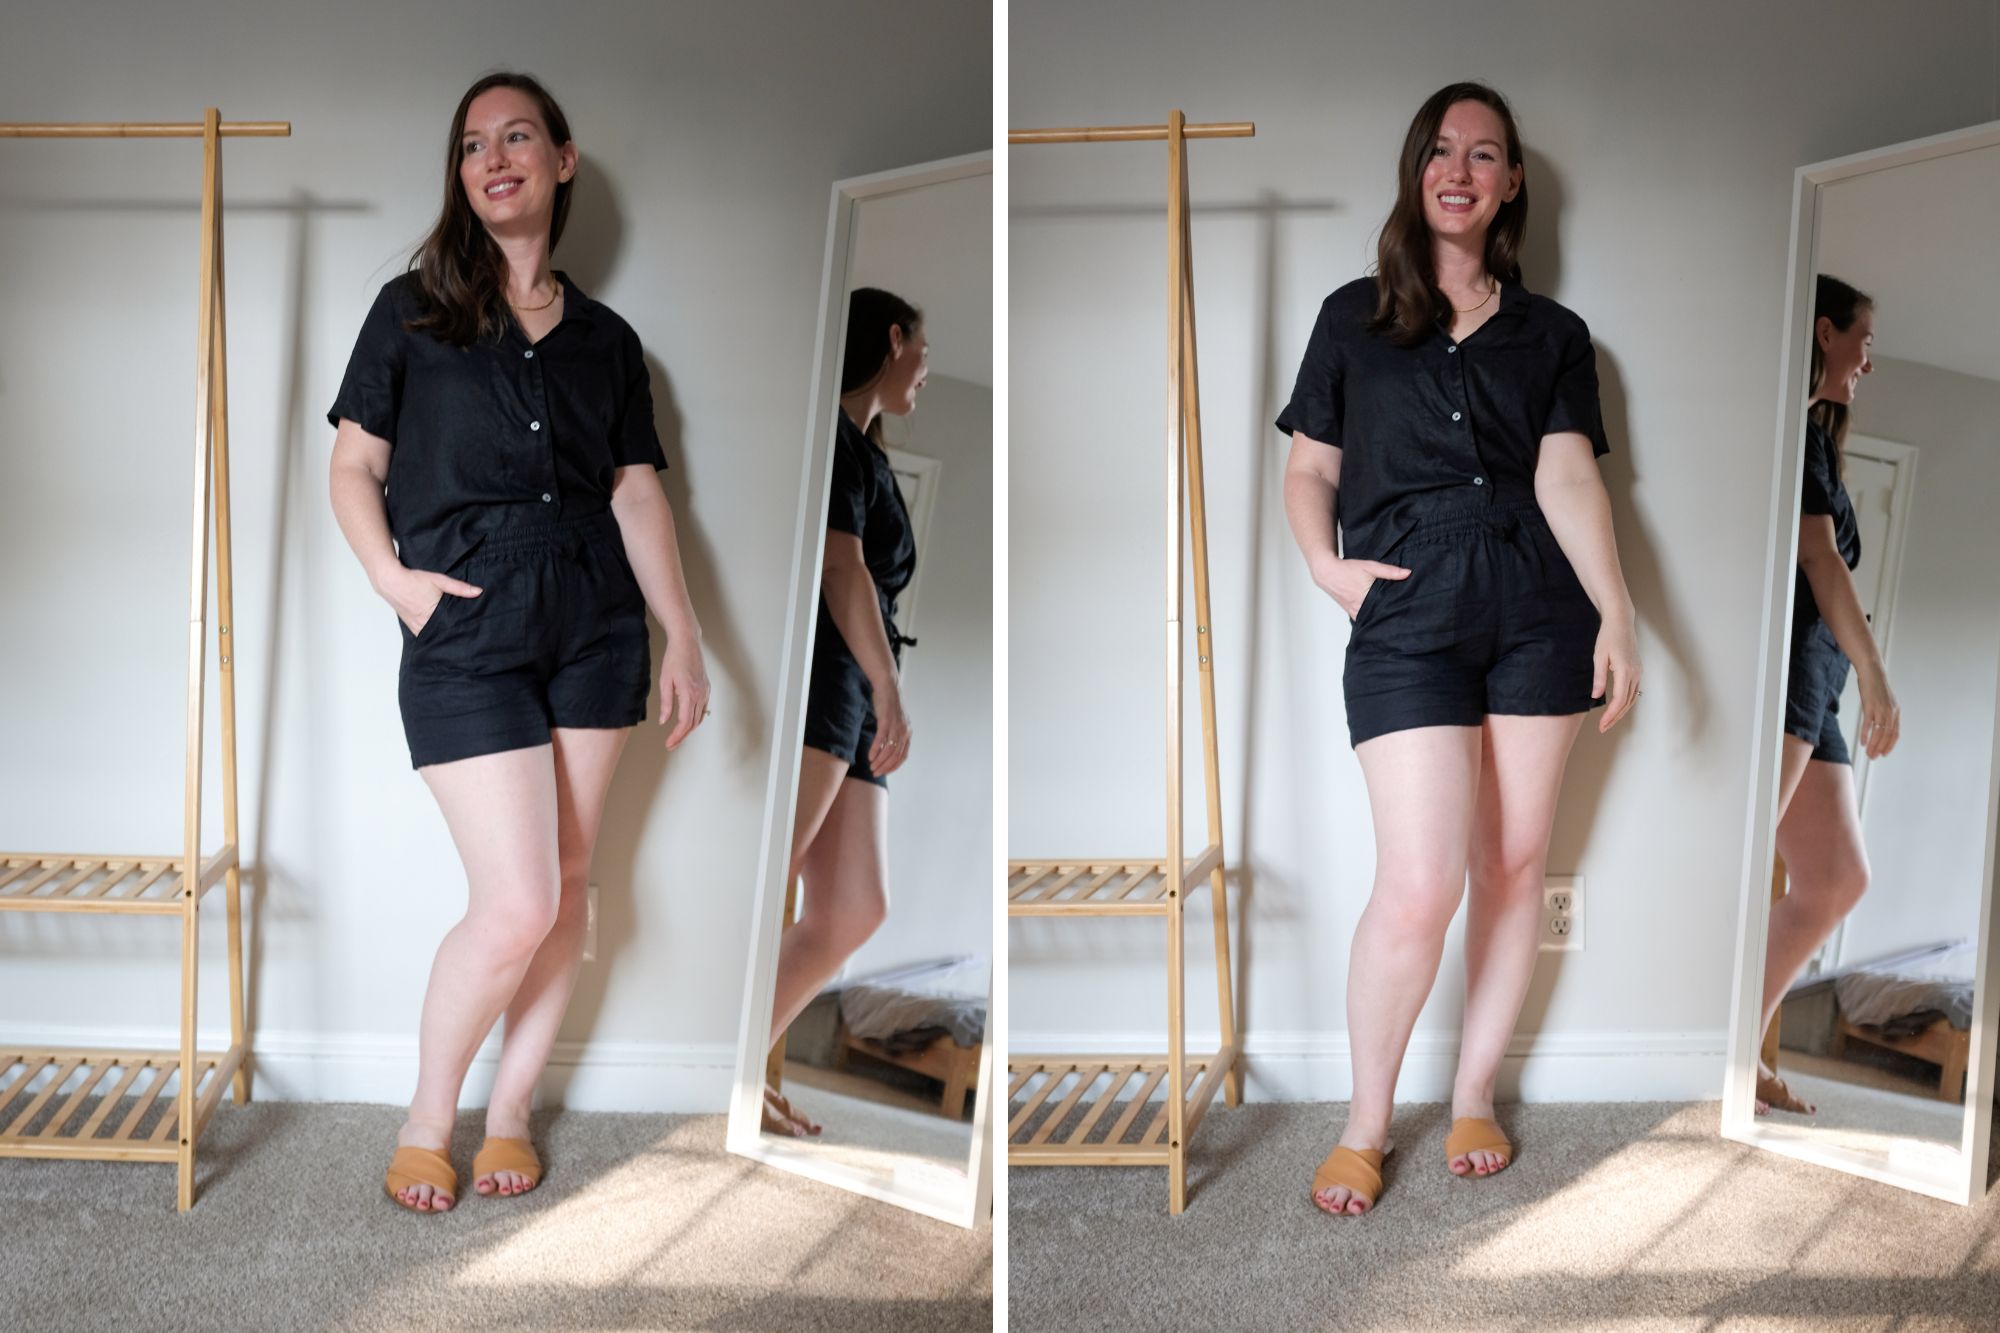 Sets Appeal: A Review of Almost Every Linen Top and Bottom from